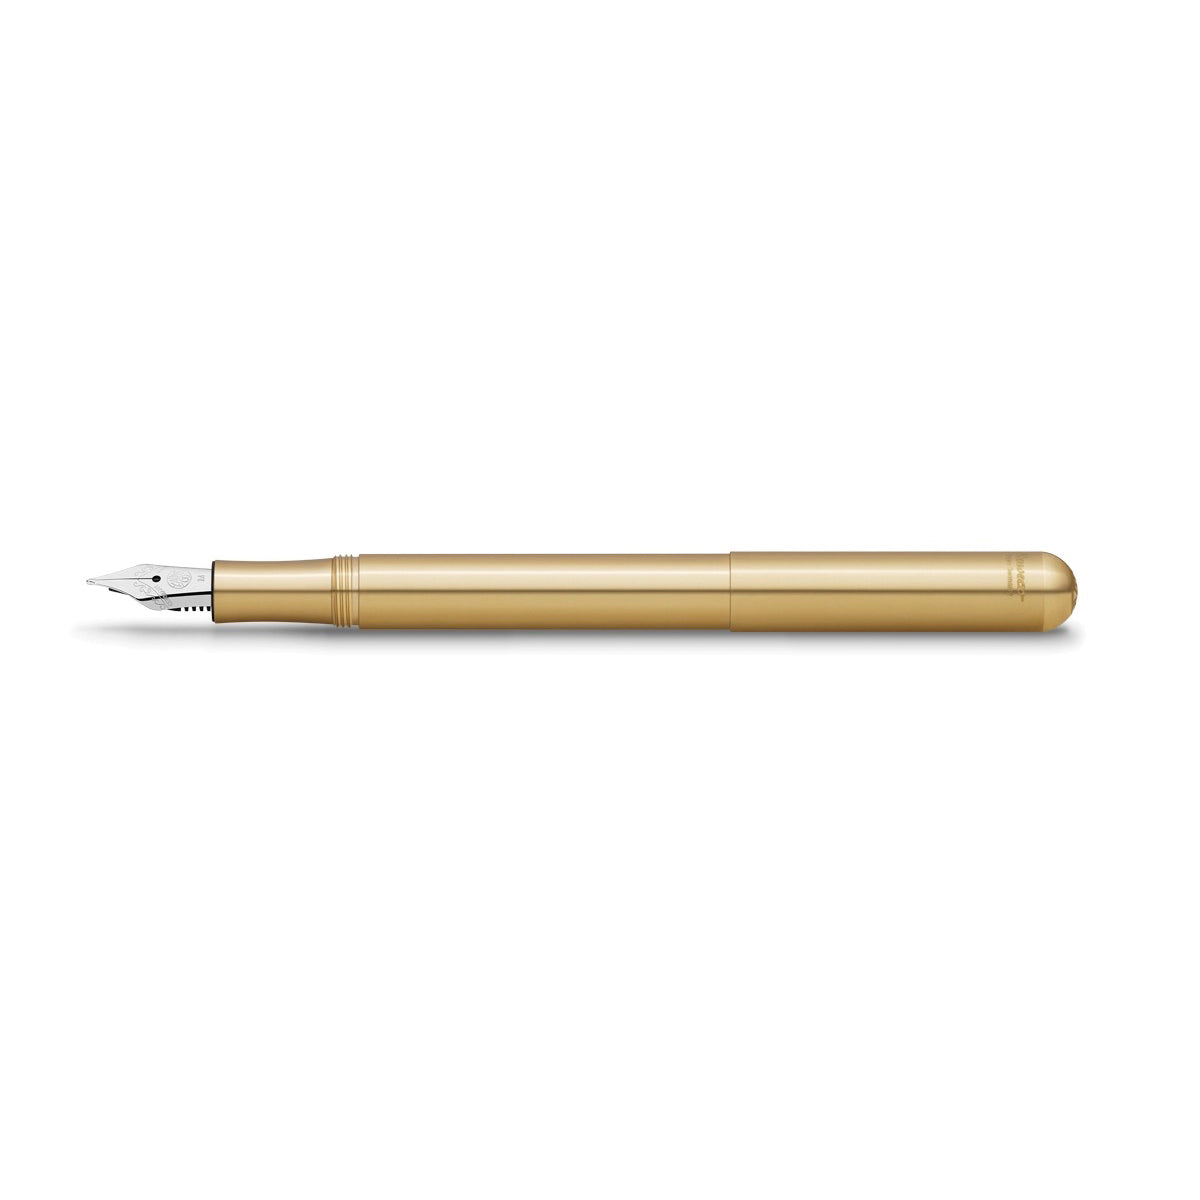 Metallic gold fountain pen with a silver nib, placed against a white background.